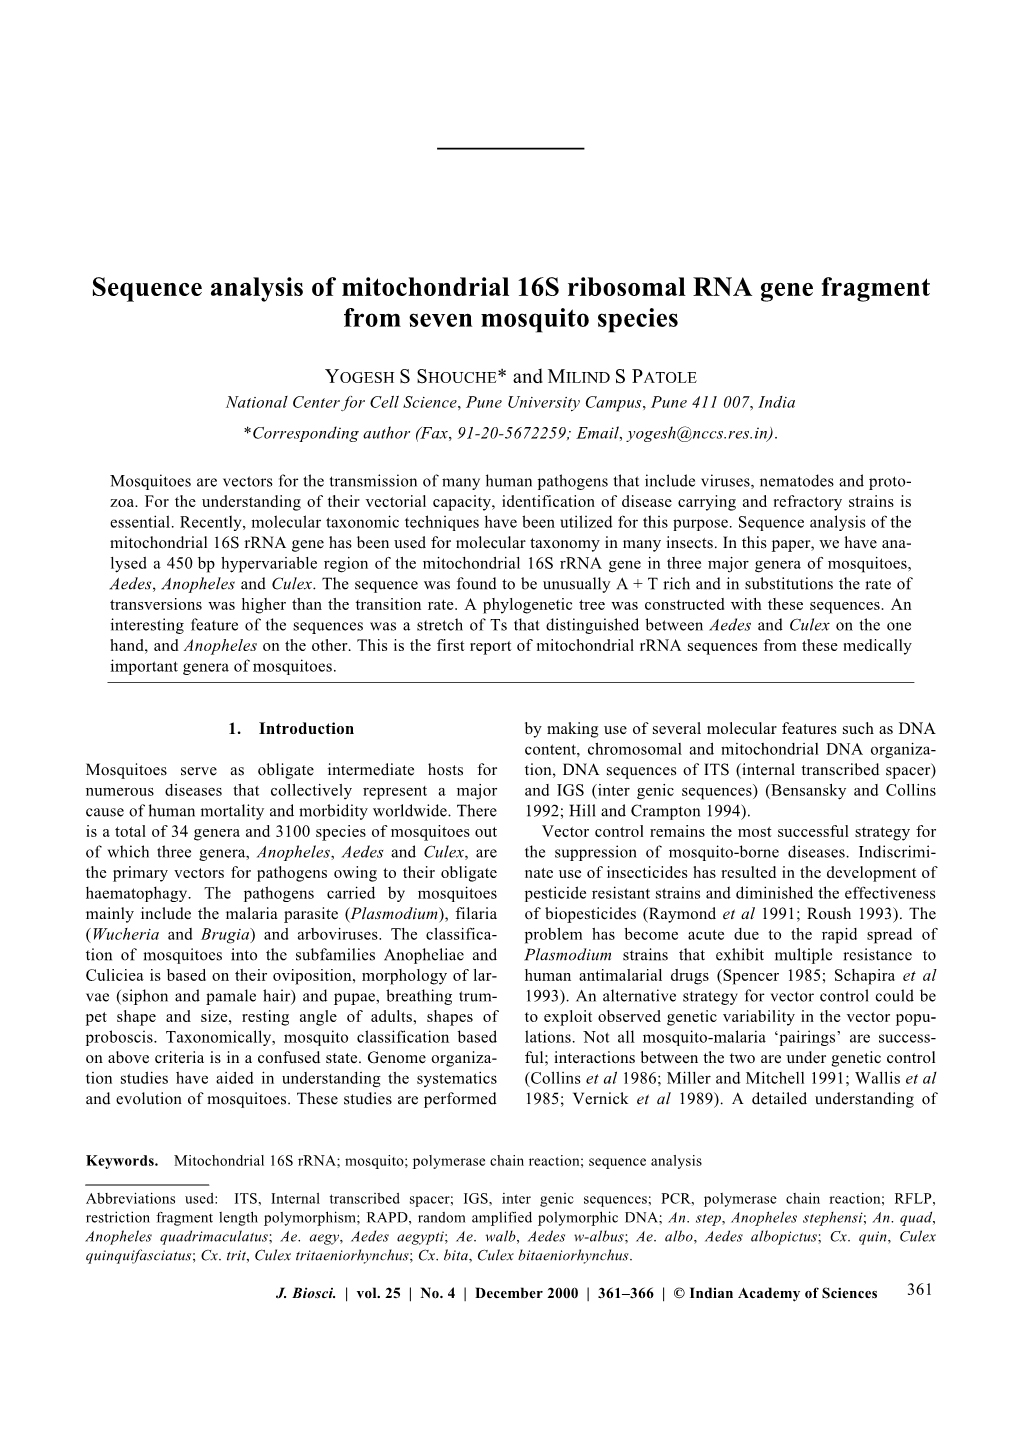 Sequence Analysis of Mitochondrial 16S Ribosomal RNA Gene Fragment from Seven Mosquito Species